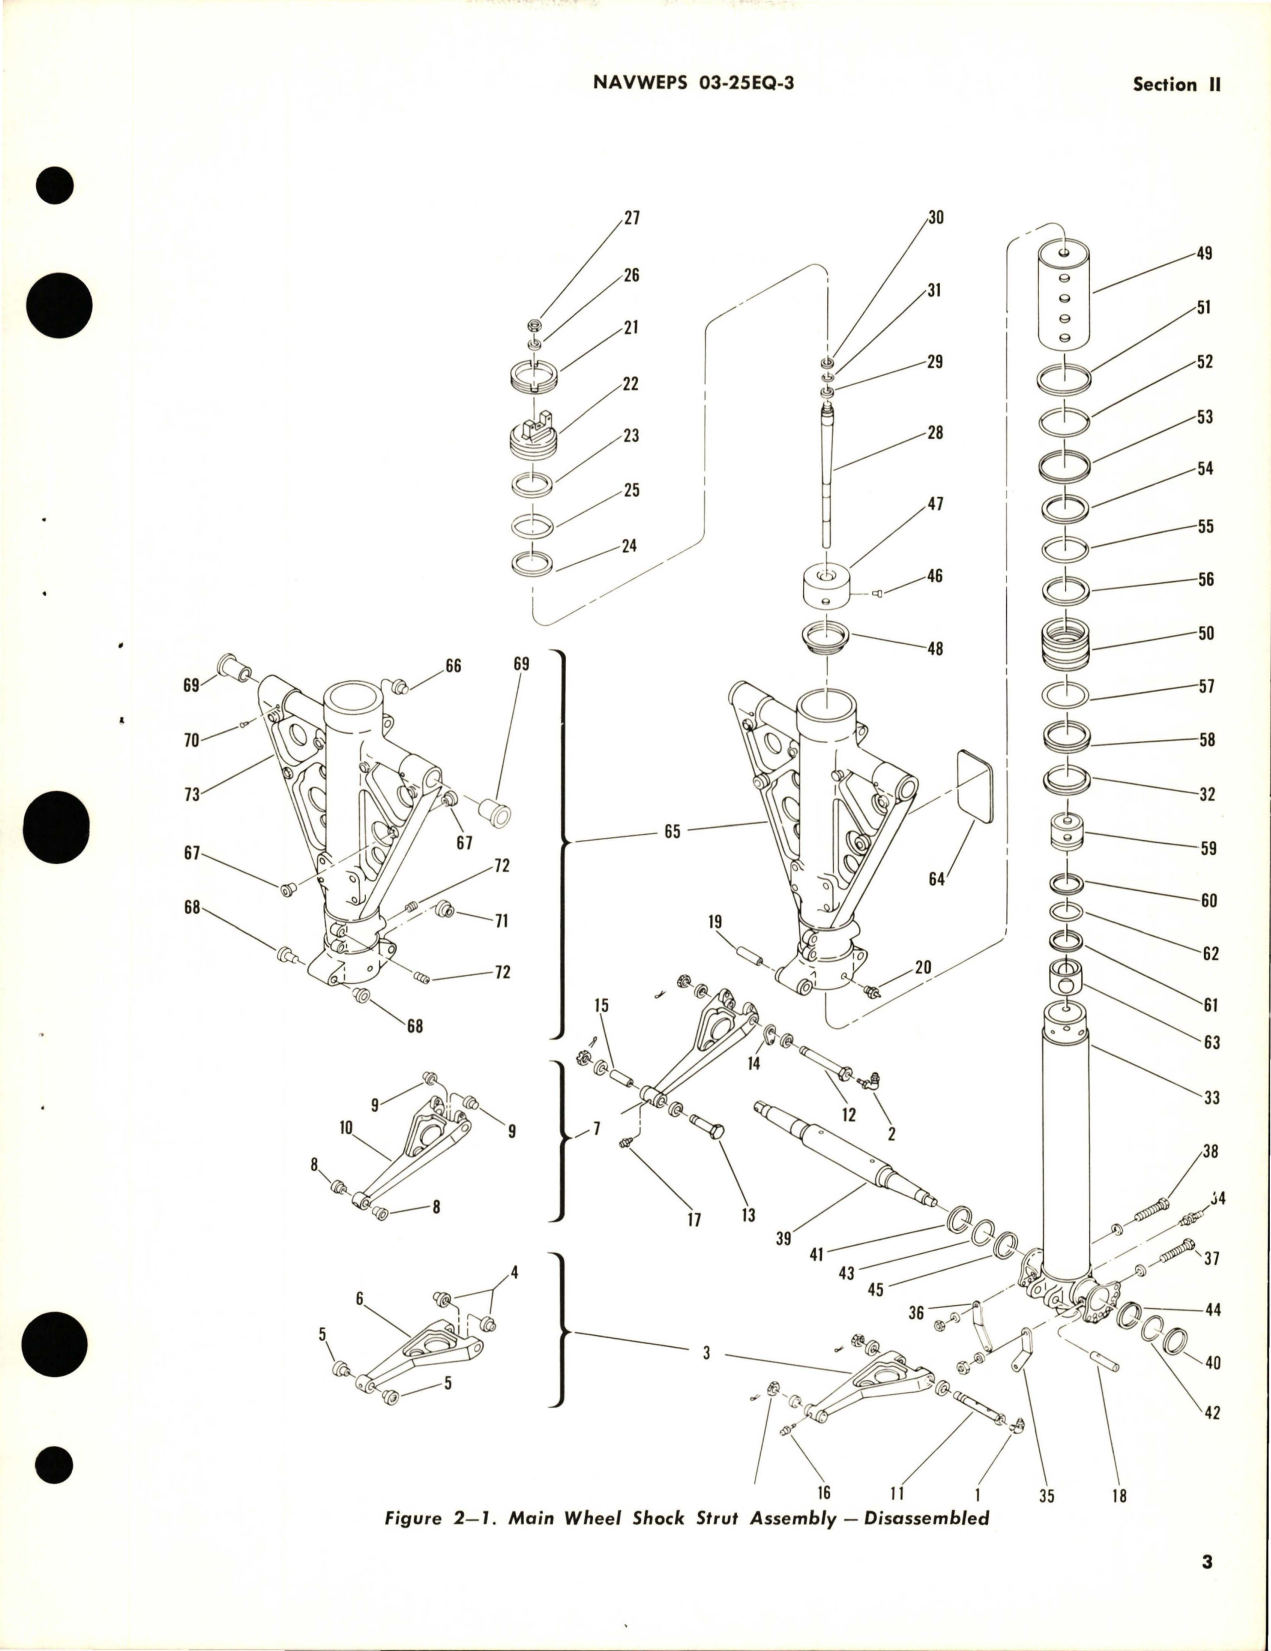 Sample page 7 from AirCorps Library document: Overhaul Instructions for Main Wheel Shock Strut Assembly - Part S6125-50102-1